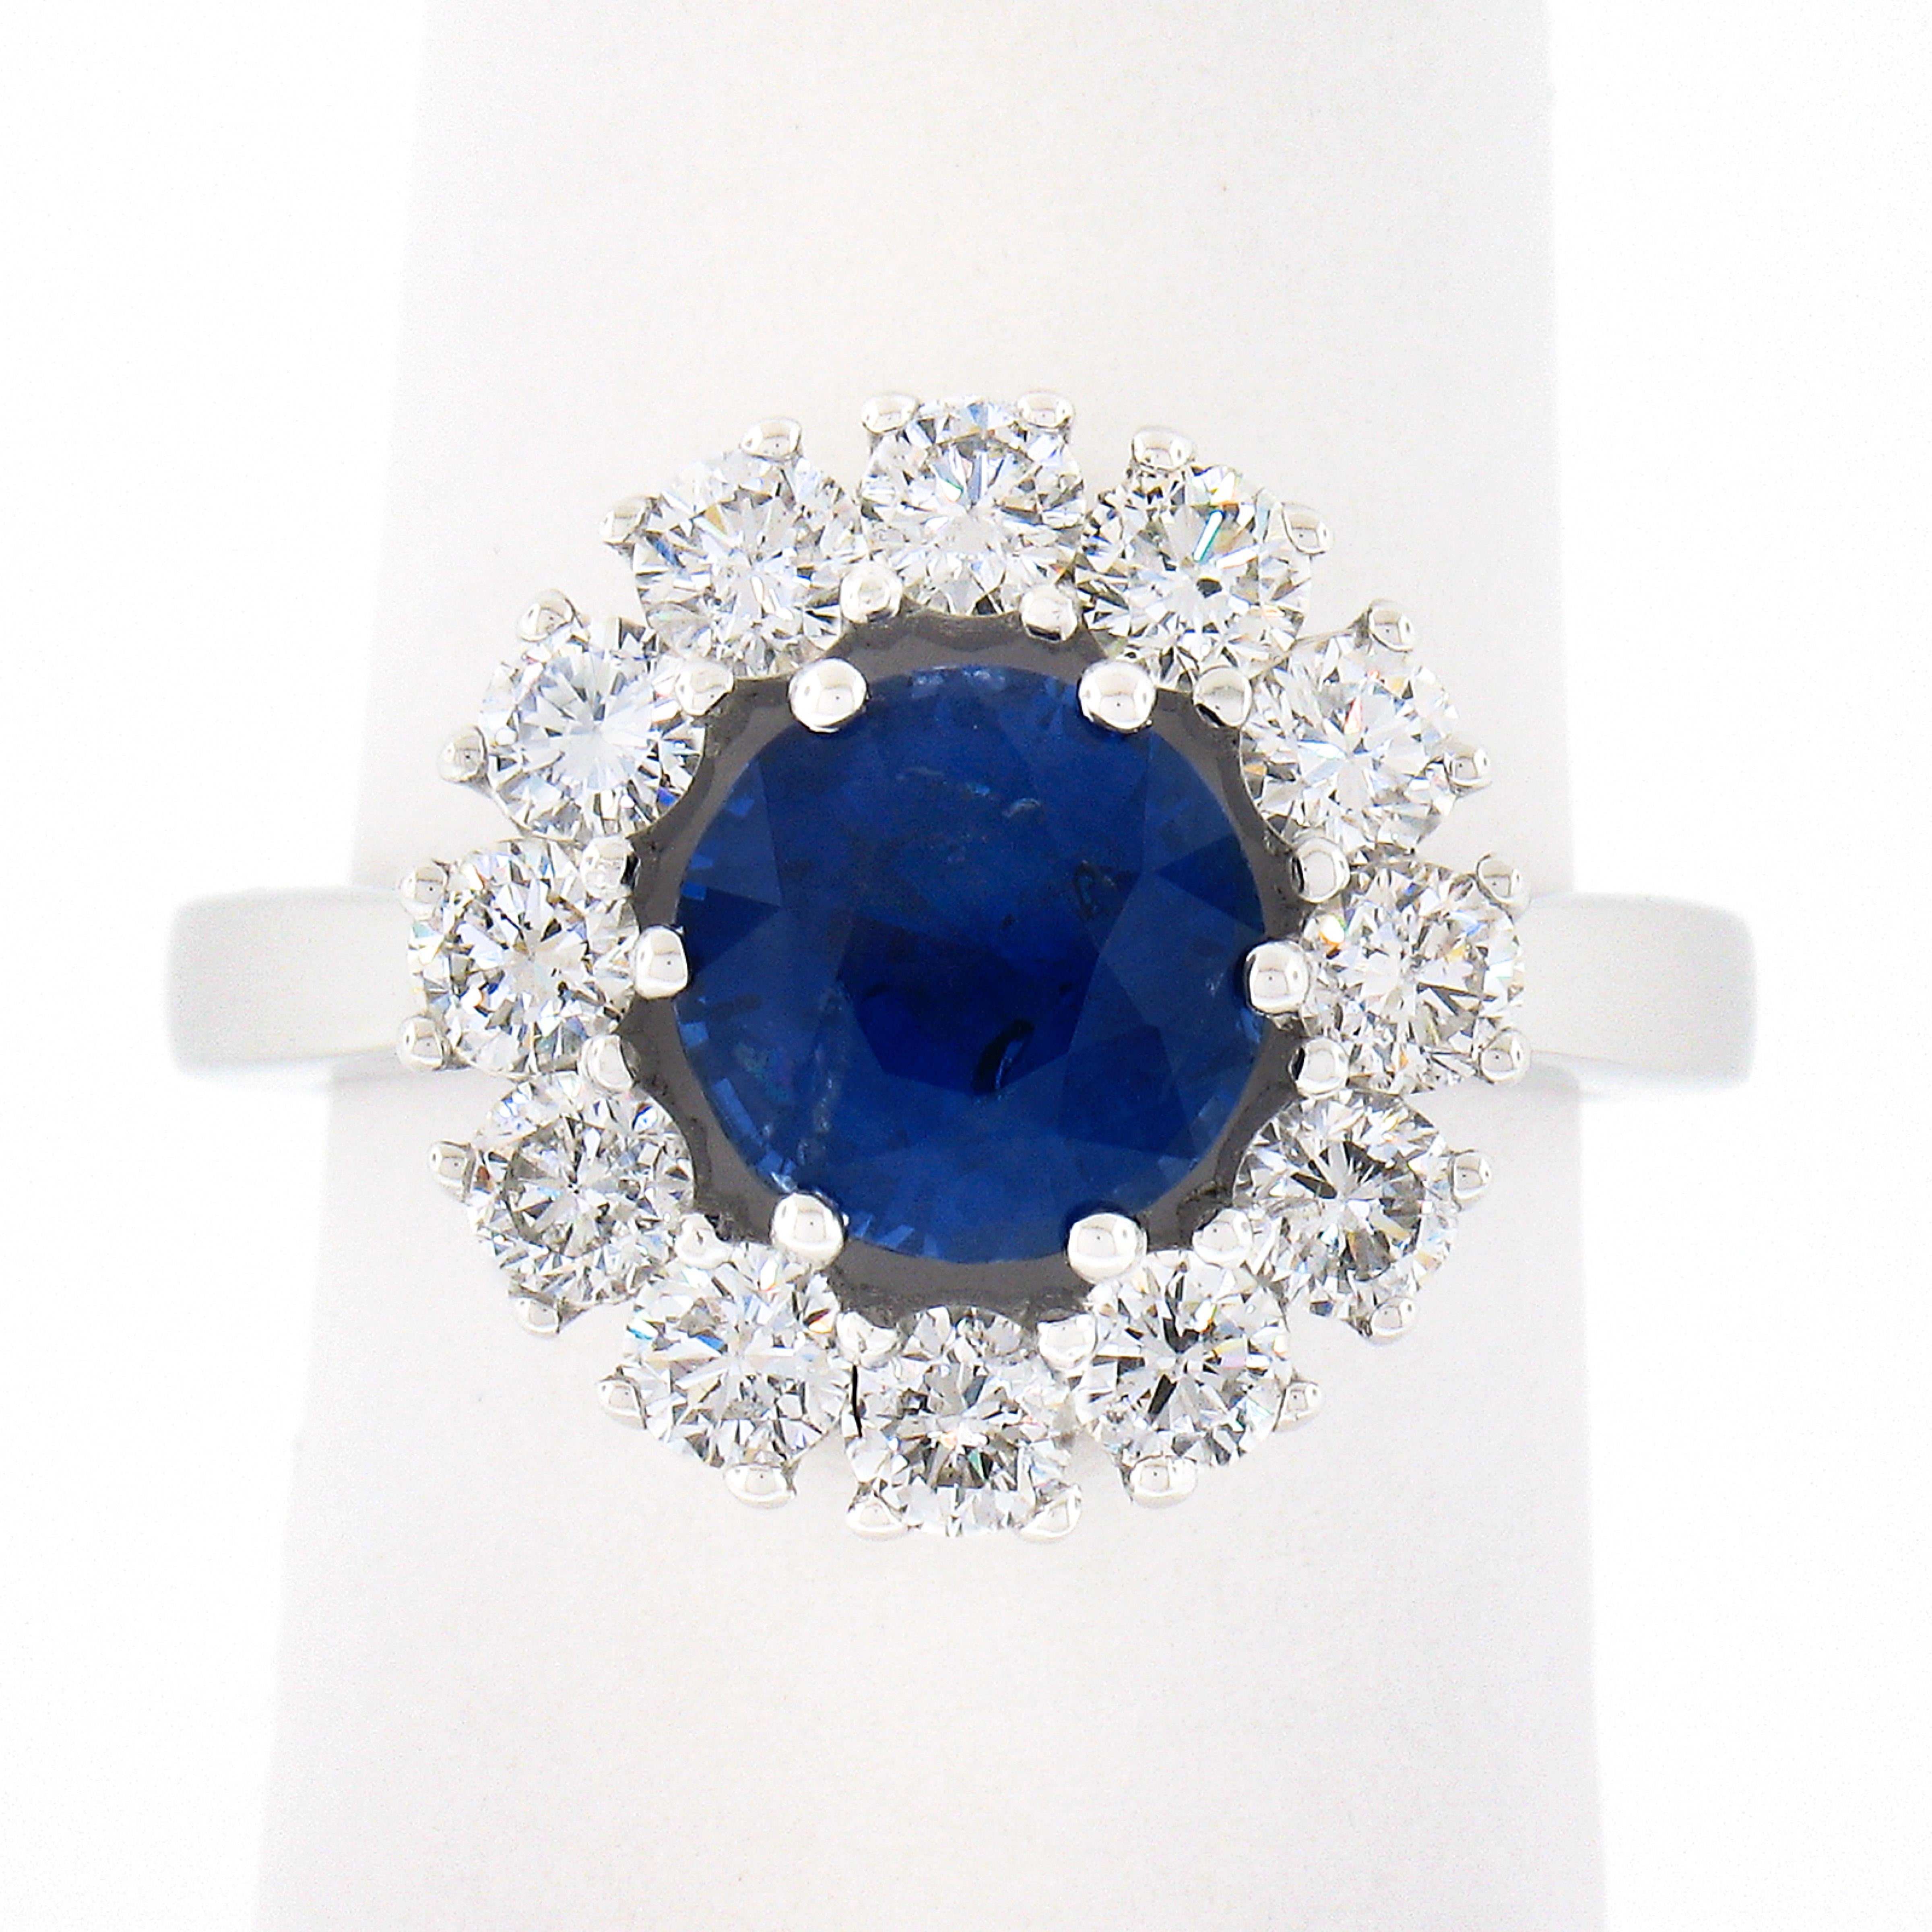 You are looking at a truly magnificent and very well made sapphire and diamond cocktail ring that is newly crafted from solid platinum. The ring features a rare round brilliant cut sapphire that is elegantly prong set at the center of a brilliant